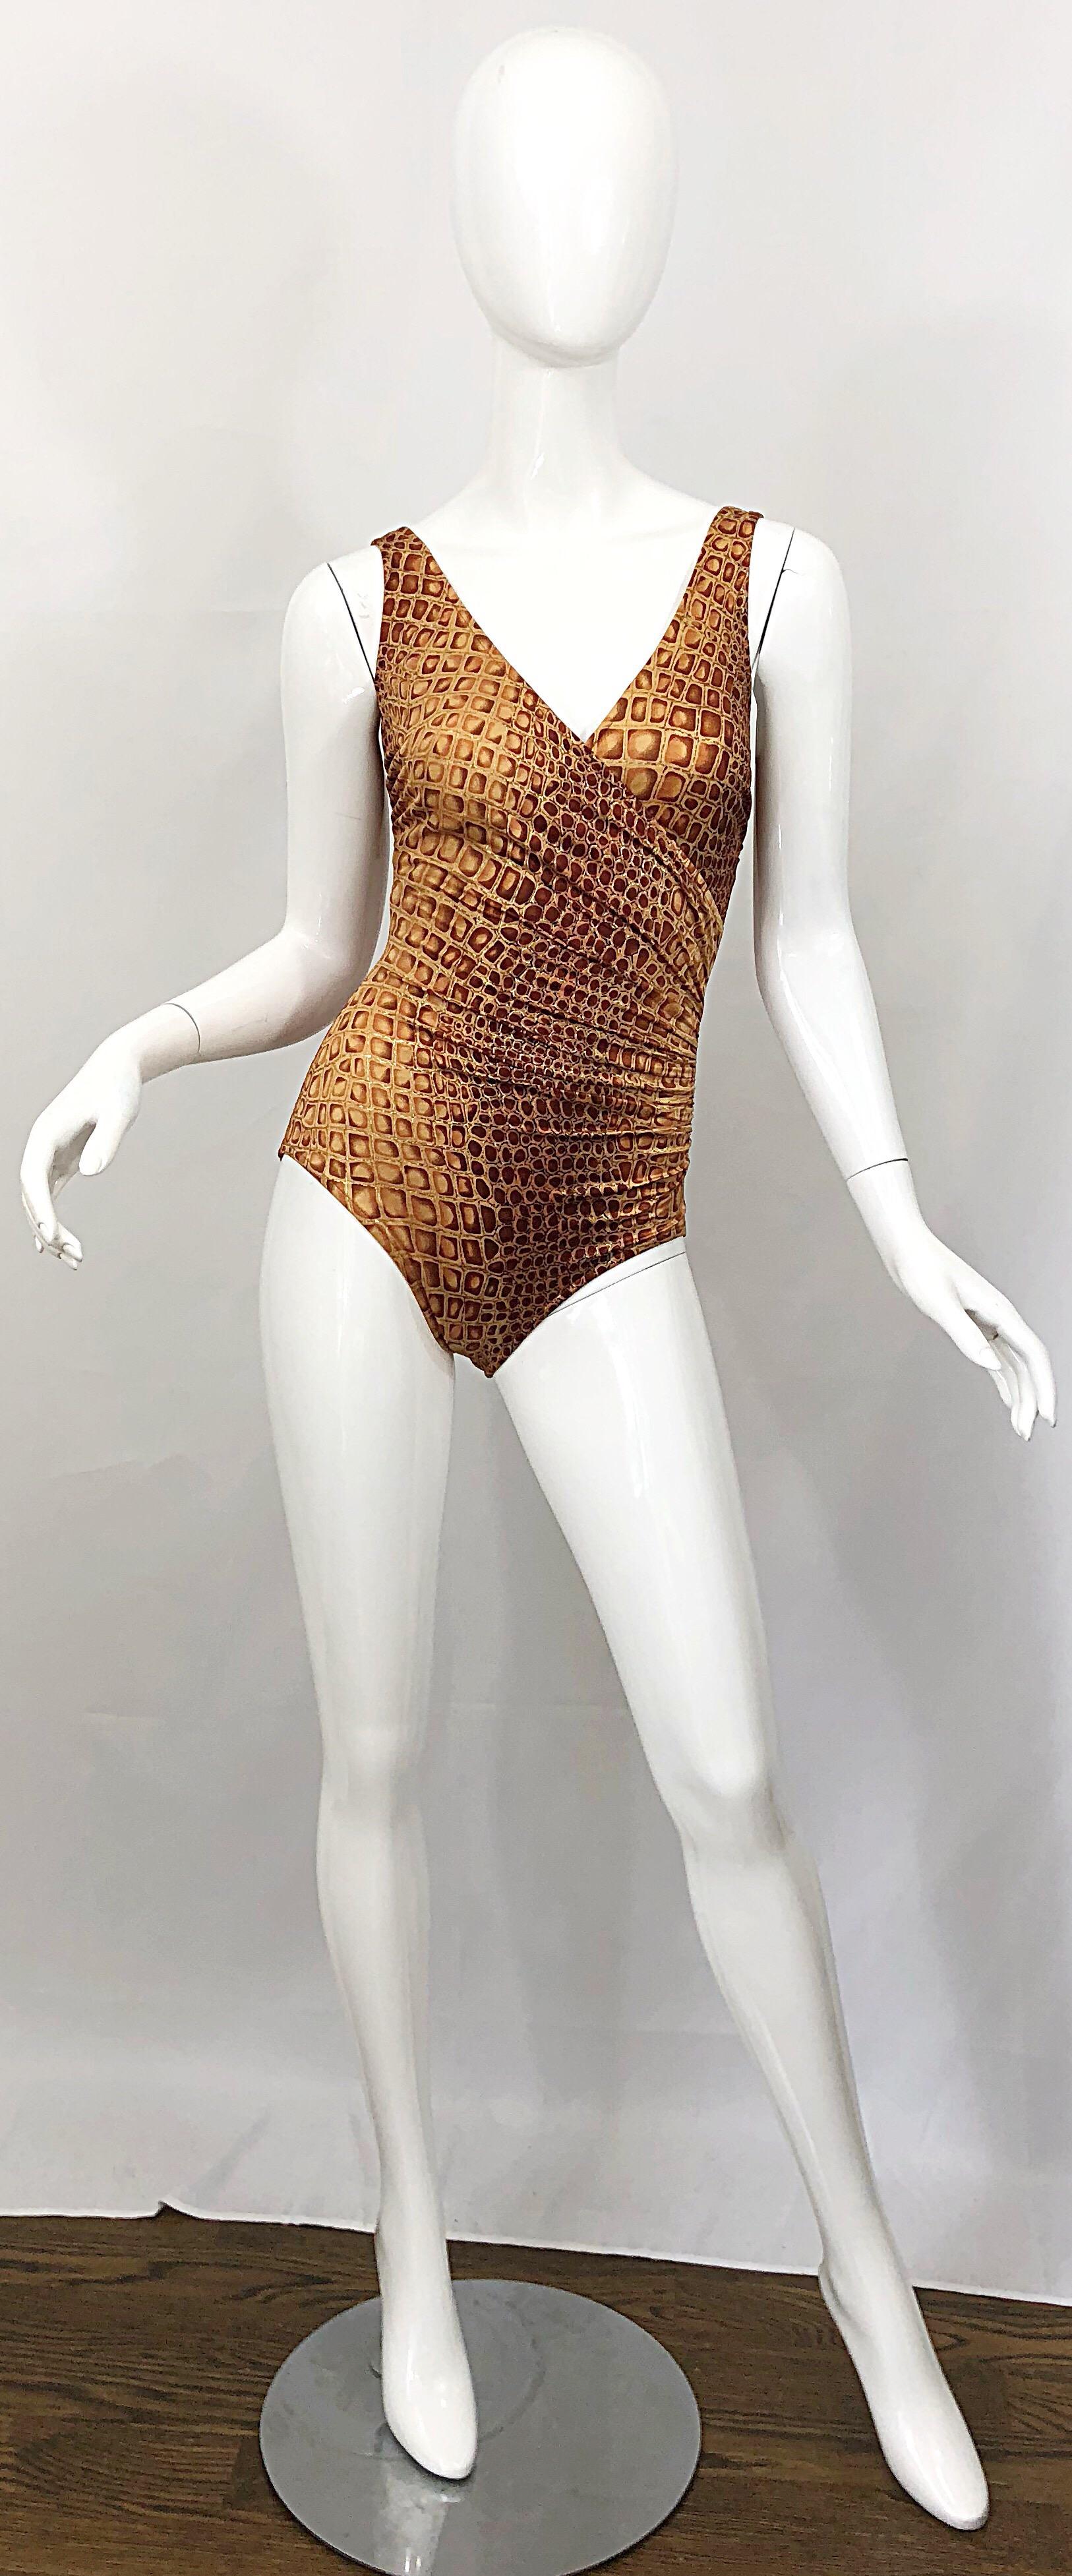 New with tags (NWT) vintage 90s BILL BLASS one piece swimsuit or bodysuit! Features a chic alligator / crocodile flattering fit. Shades of brown, rust and a muted gold. A very slimming suit that is great for the beach, pool or yacht. Also great as a